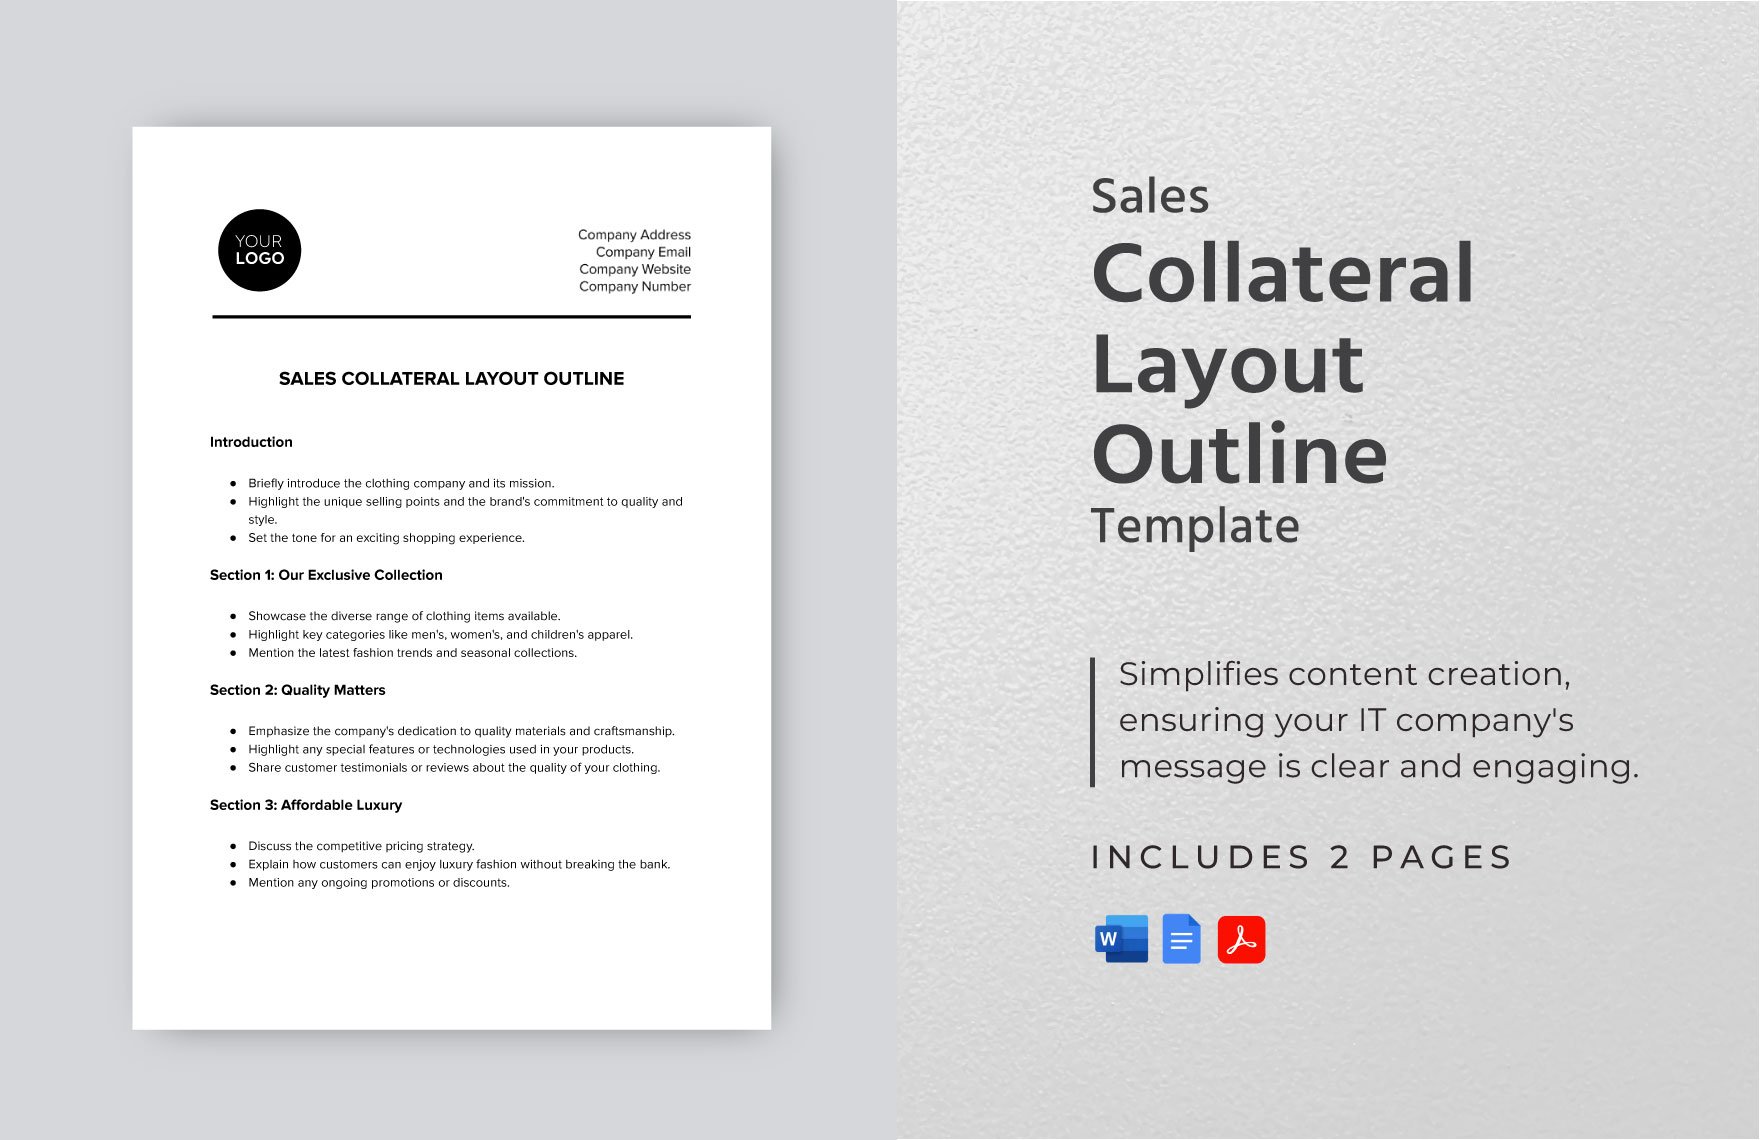 Sales Collateral Layout Outline Template in Word, Google Docs, PDF